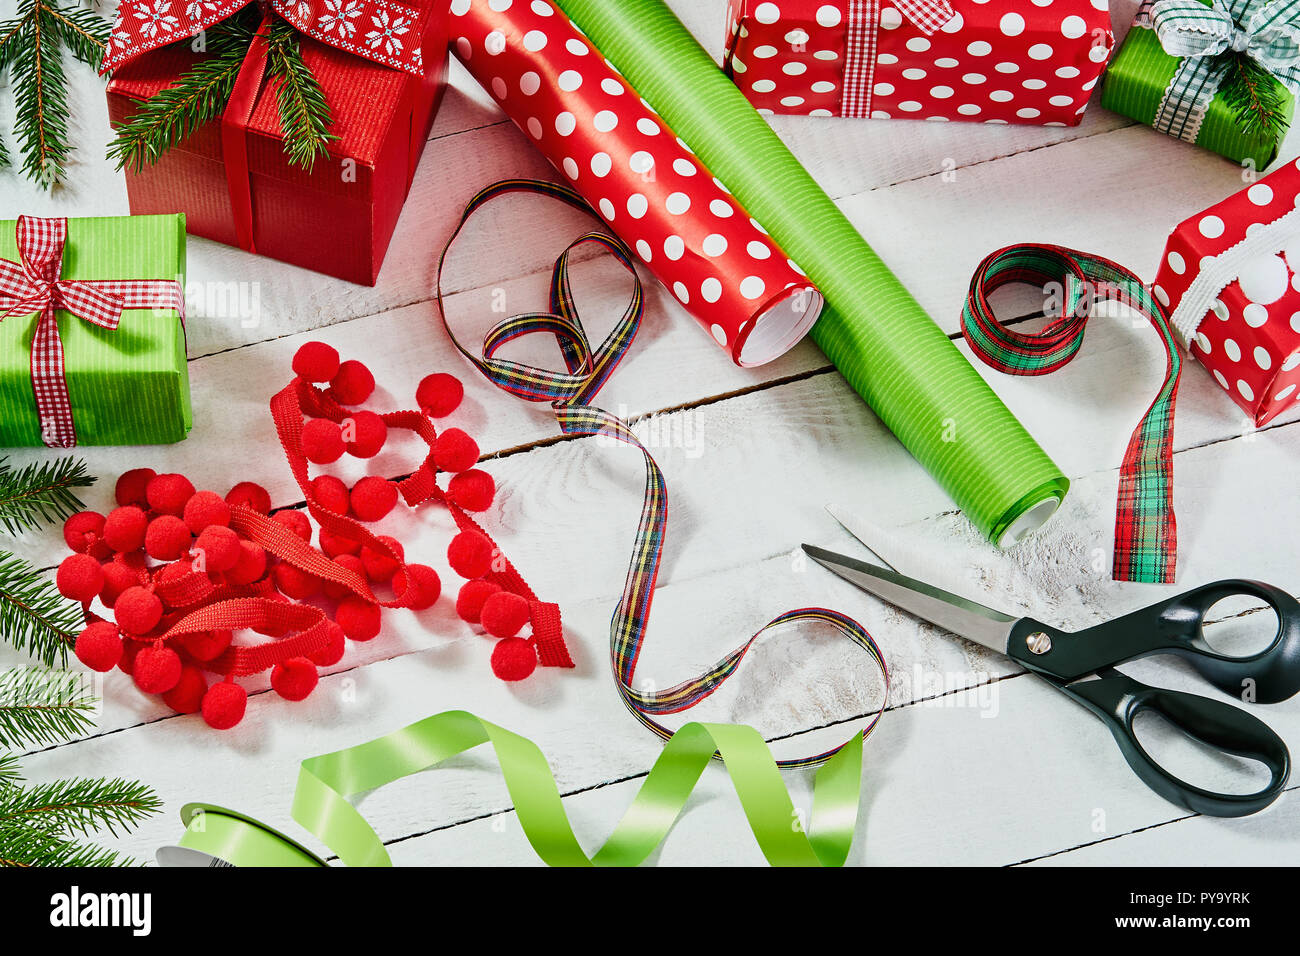 christmas present with wrapping paper scissors, Stock image